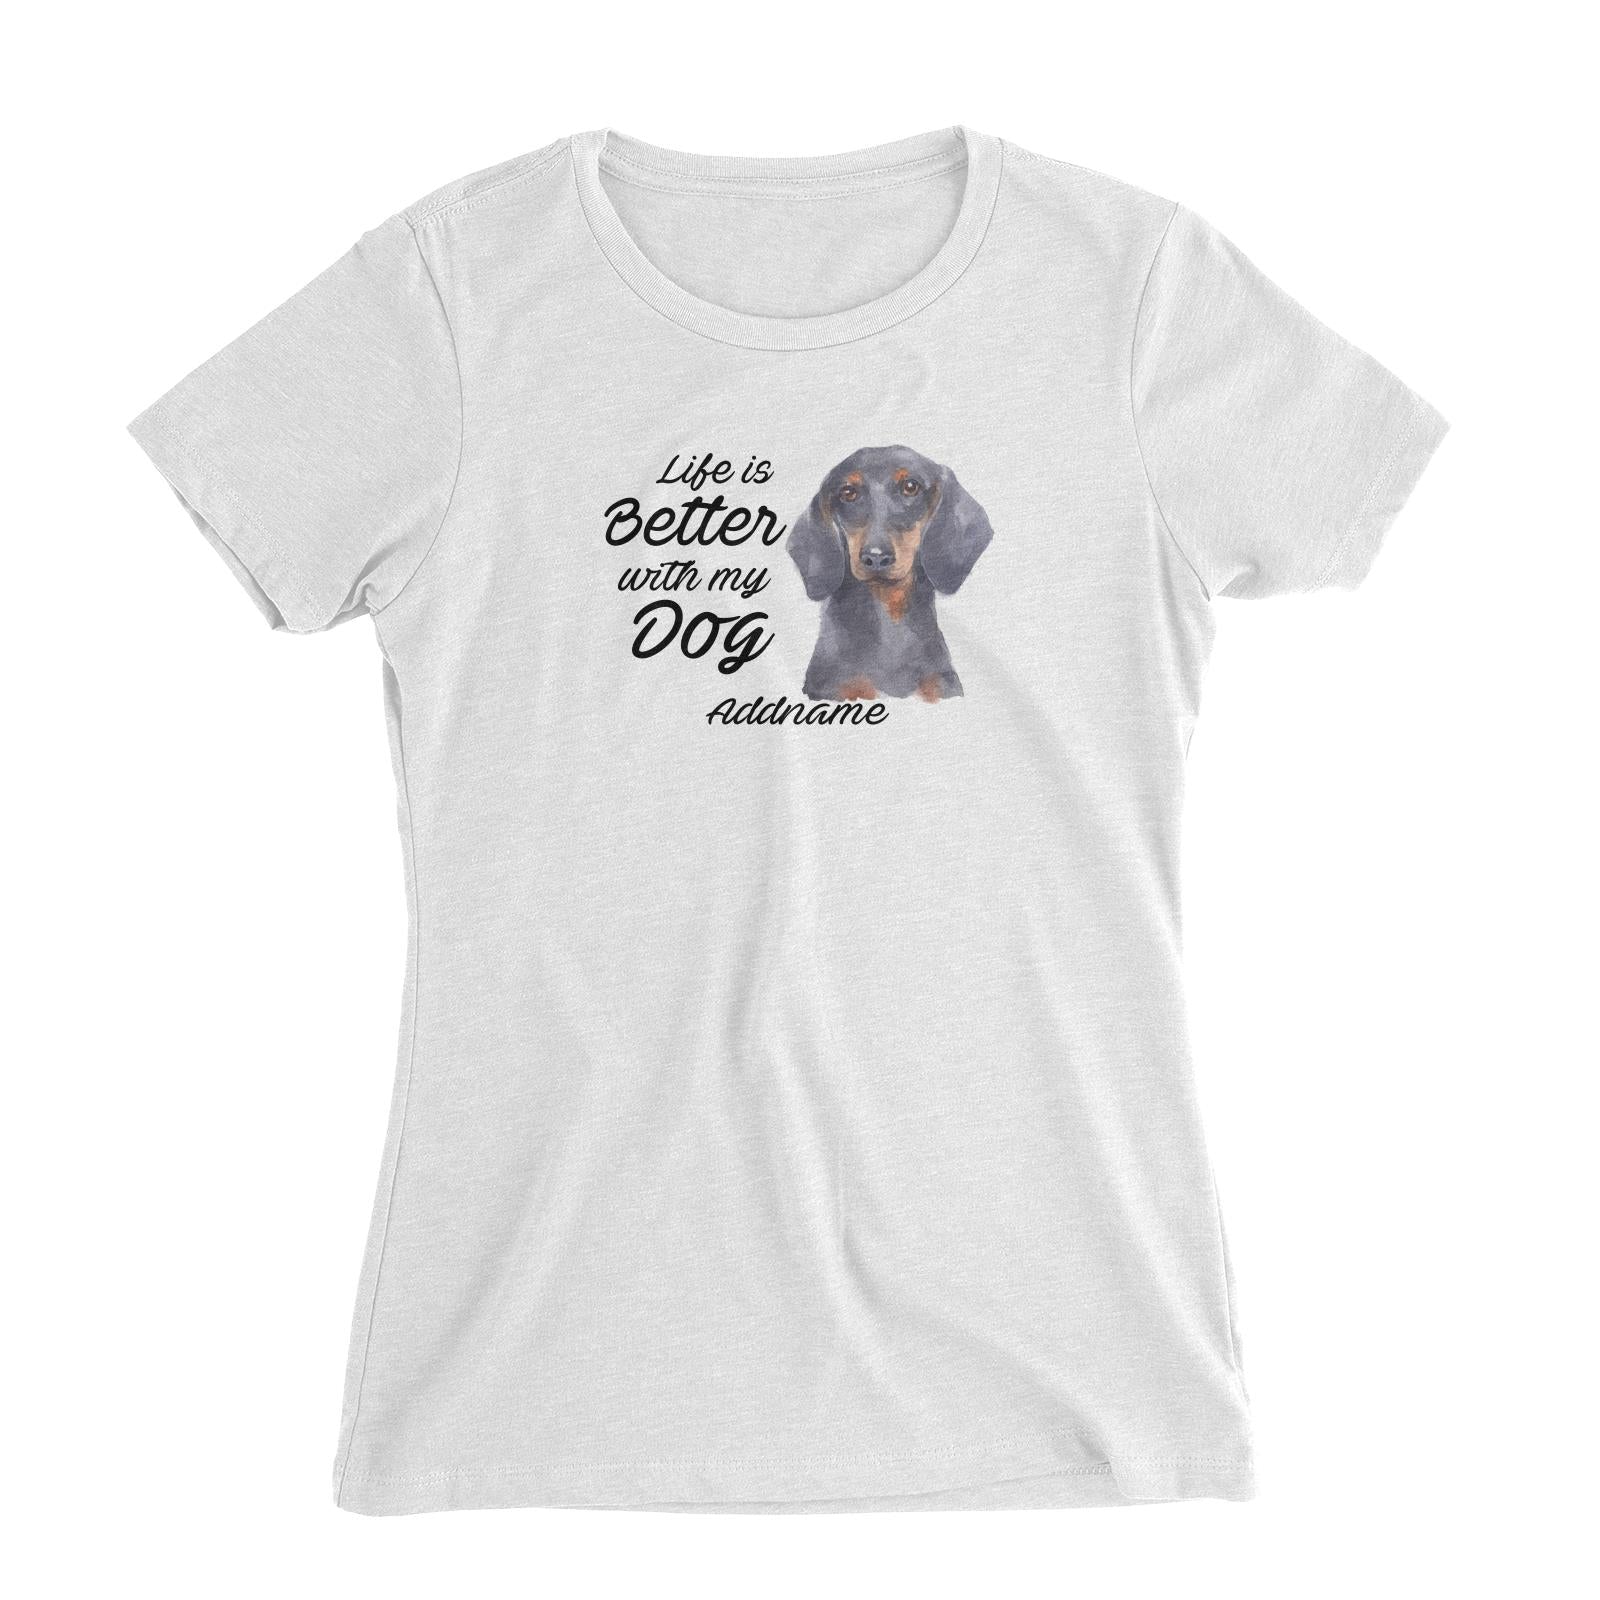 Watercolor Life is Better With My Dog Dachshund Addname Women's Slim Fit T-Shirt